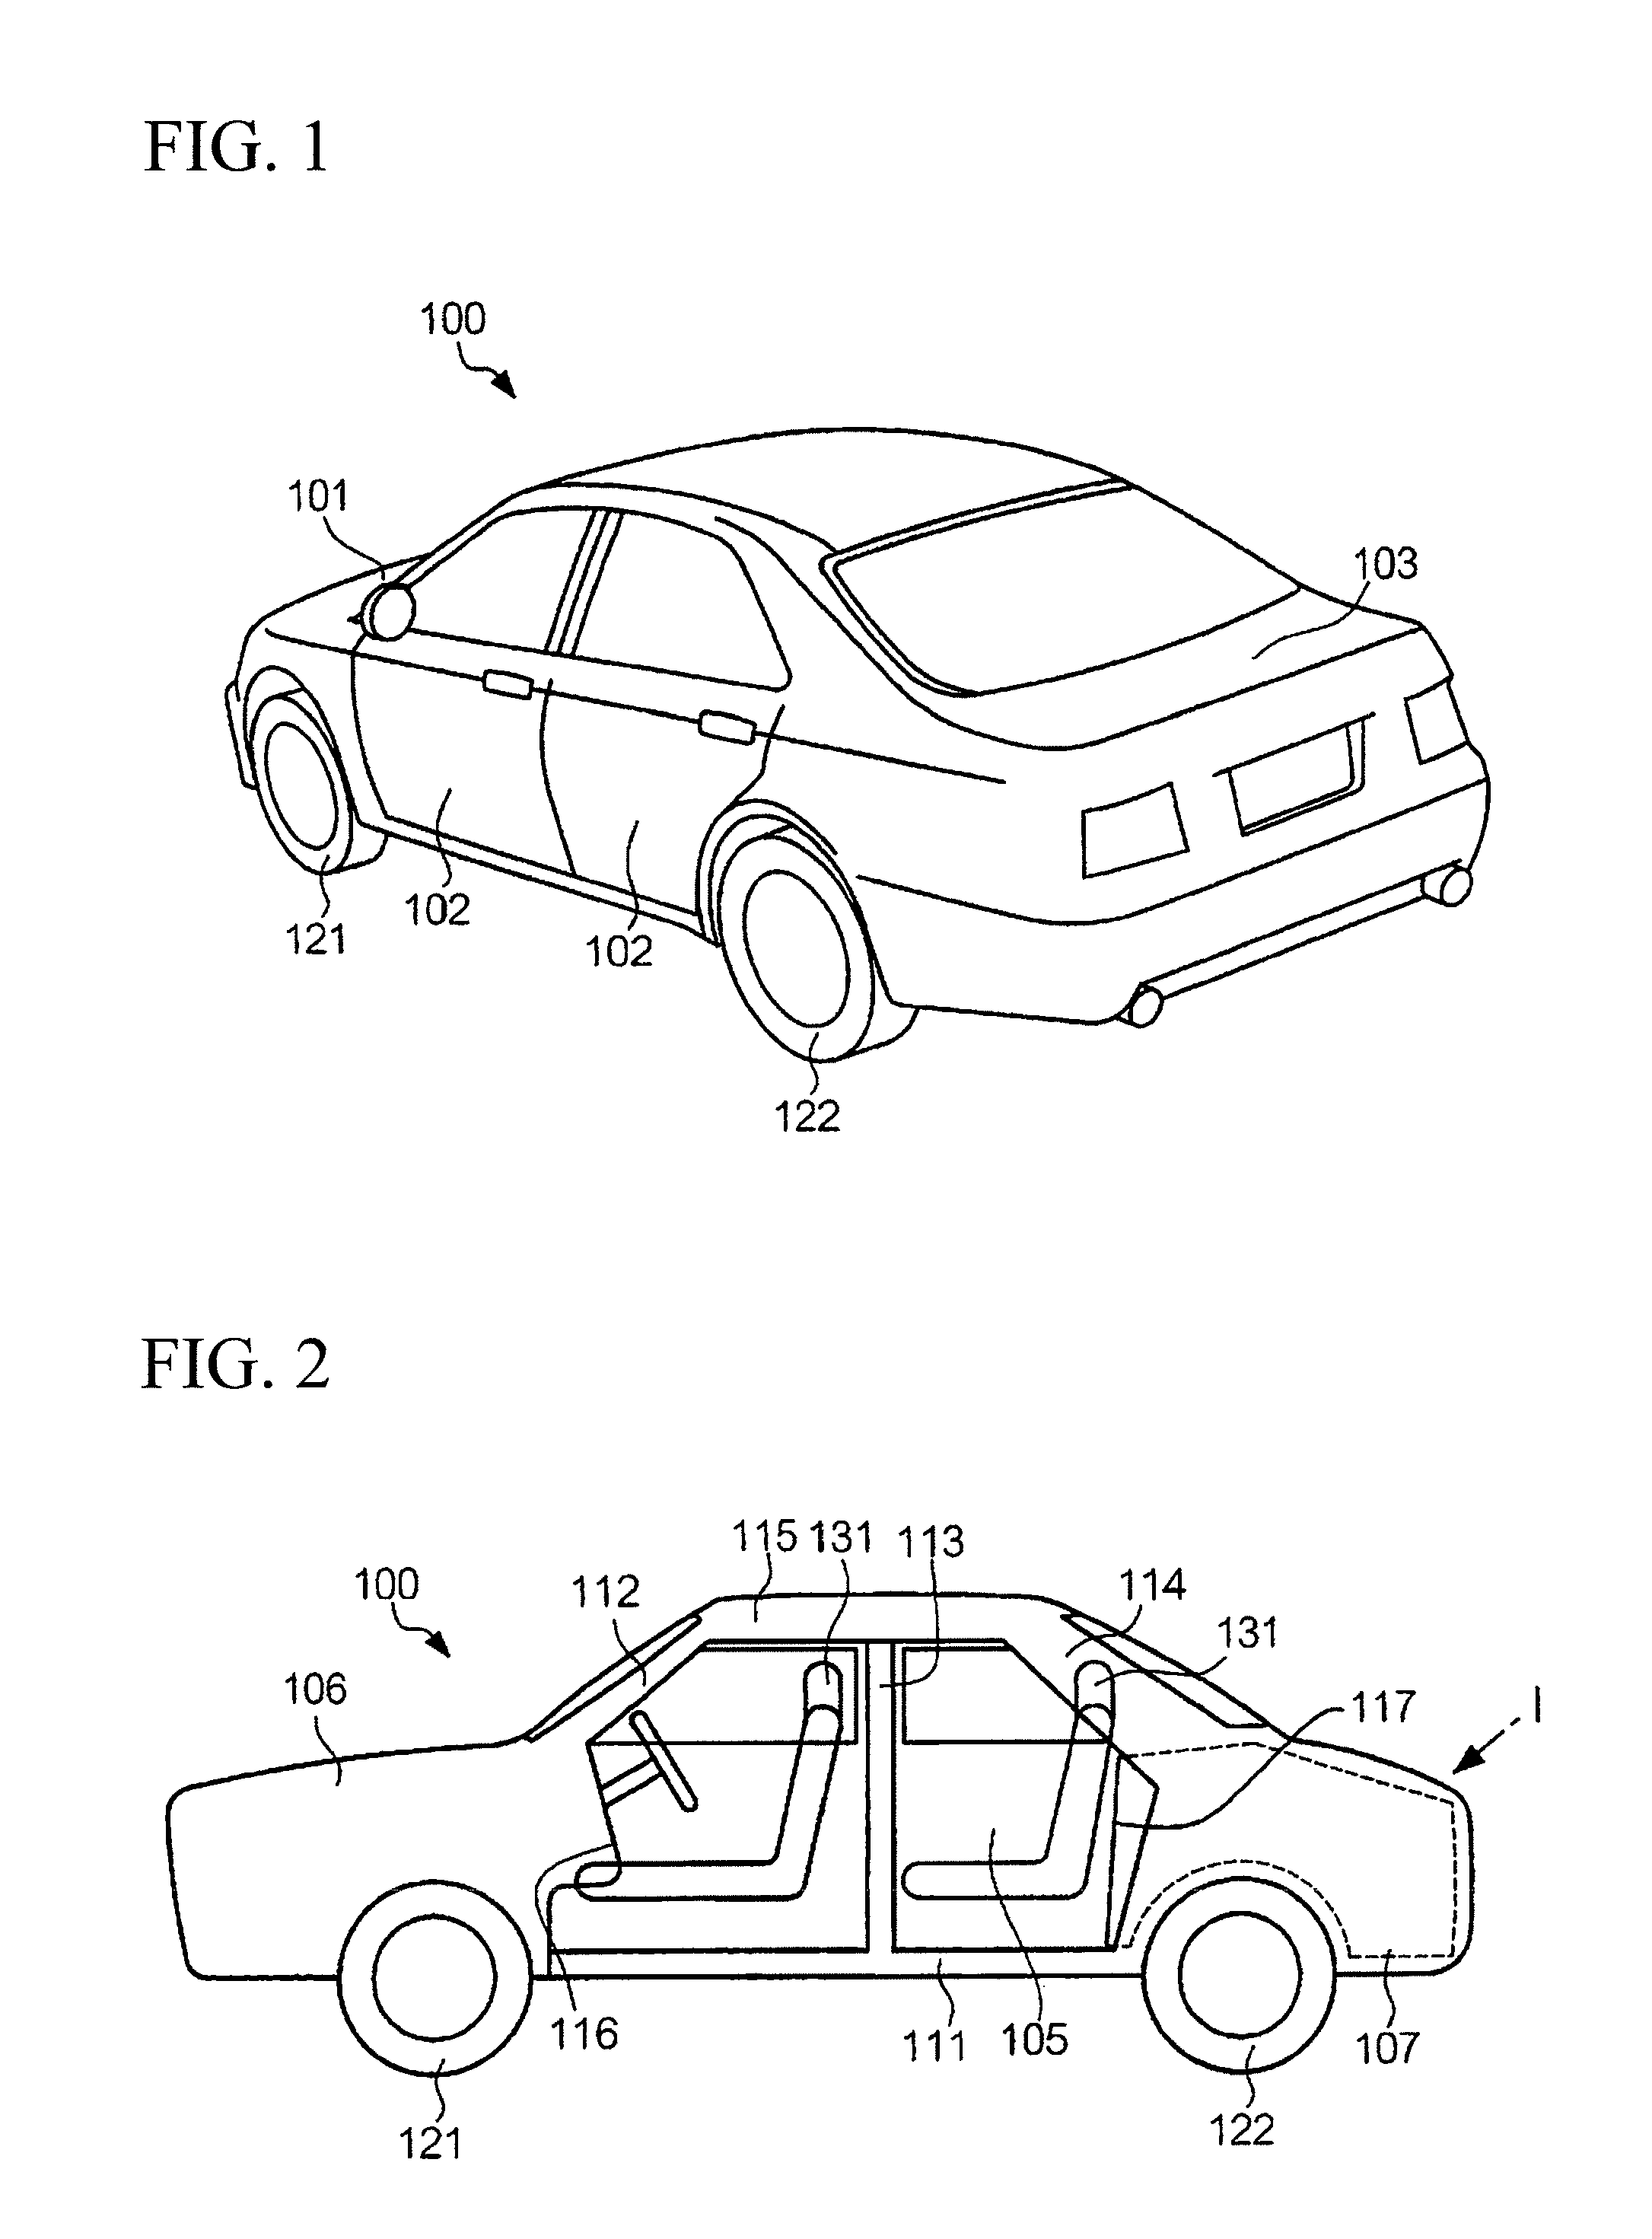 Sound absorbing structure built into luggage compartment of vehicle